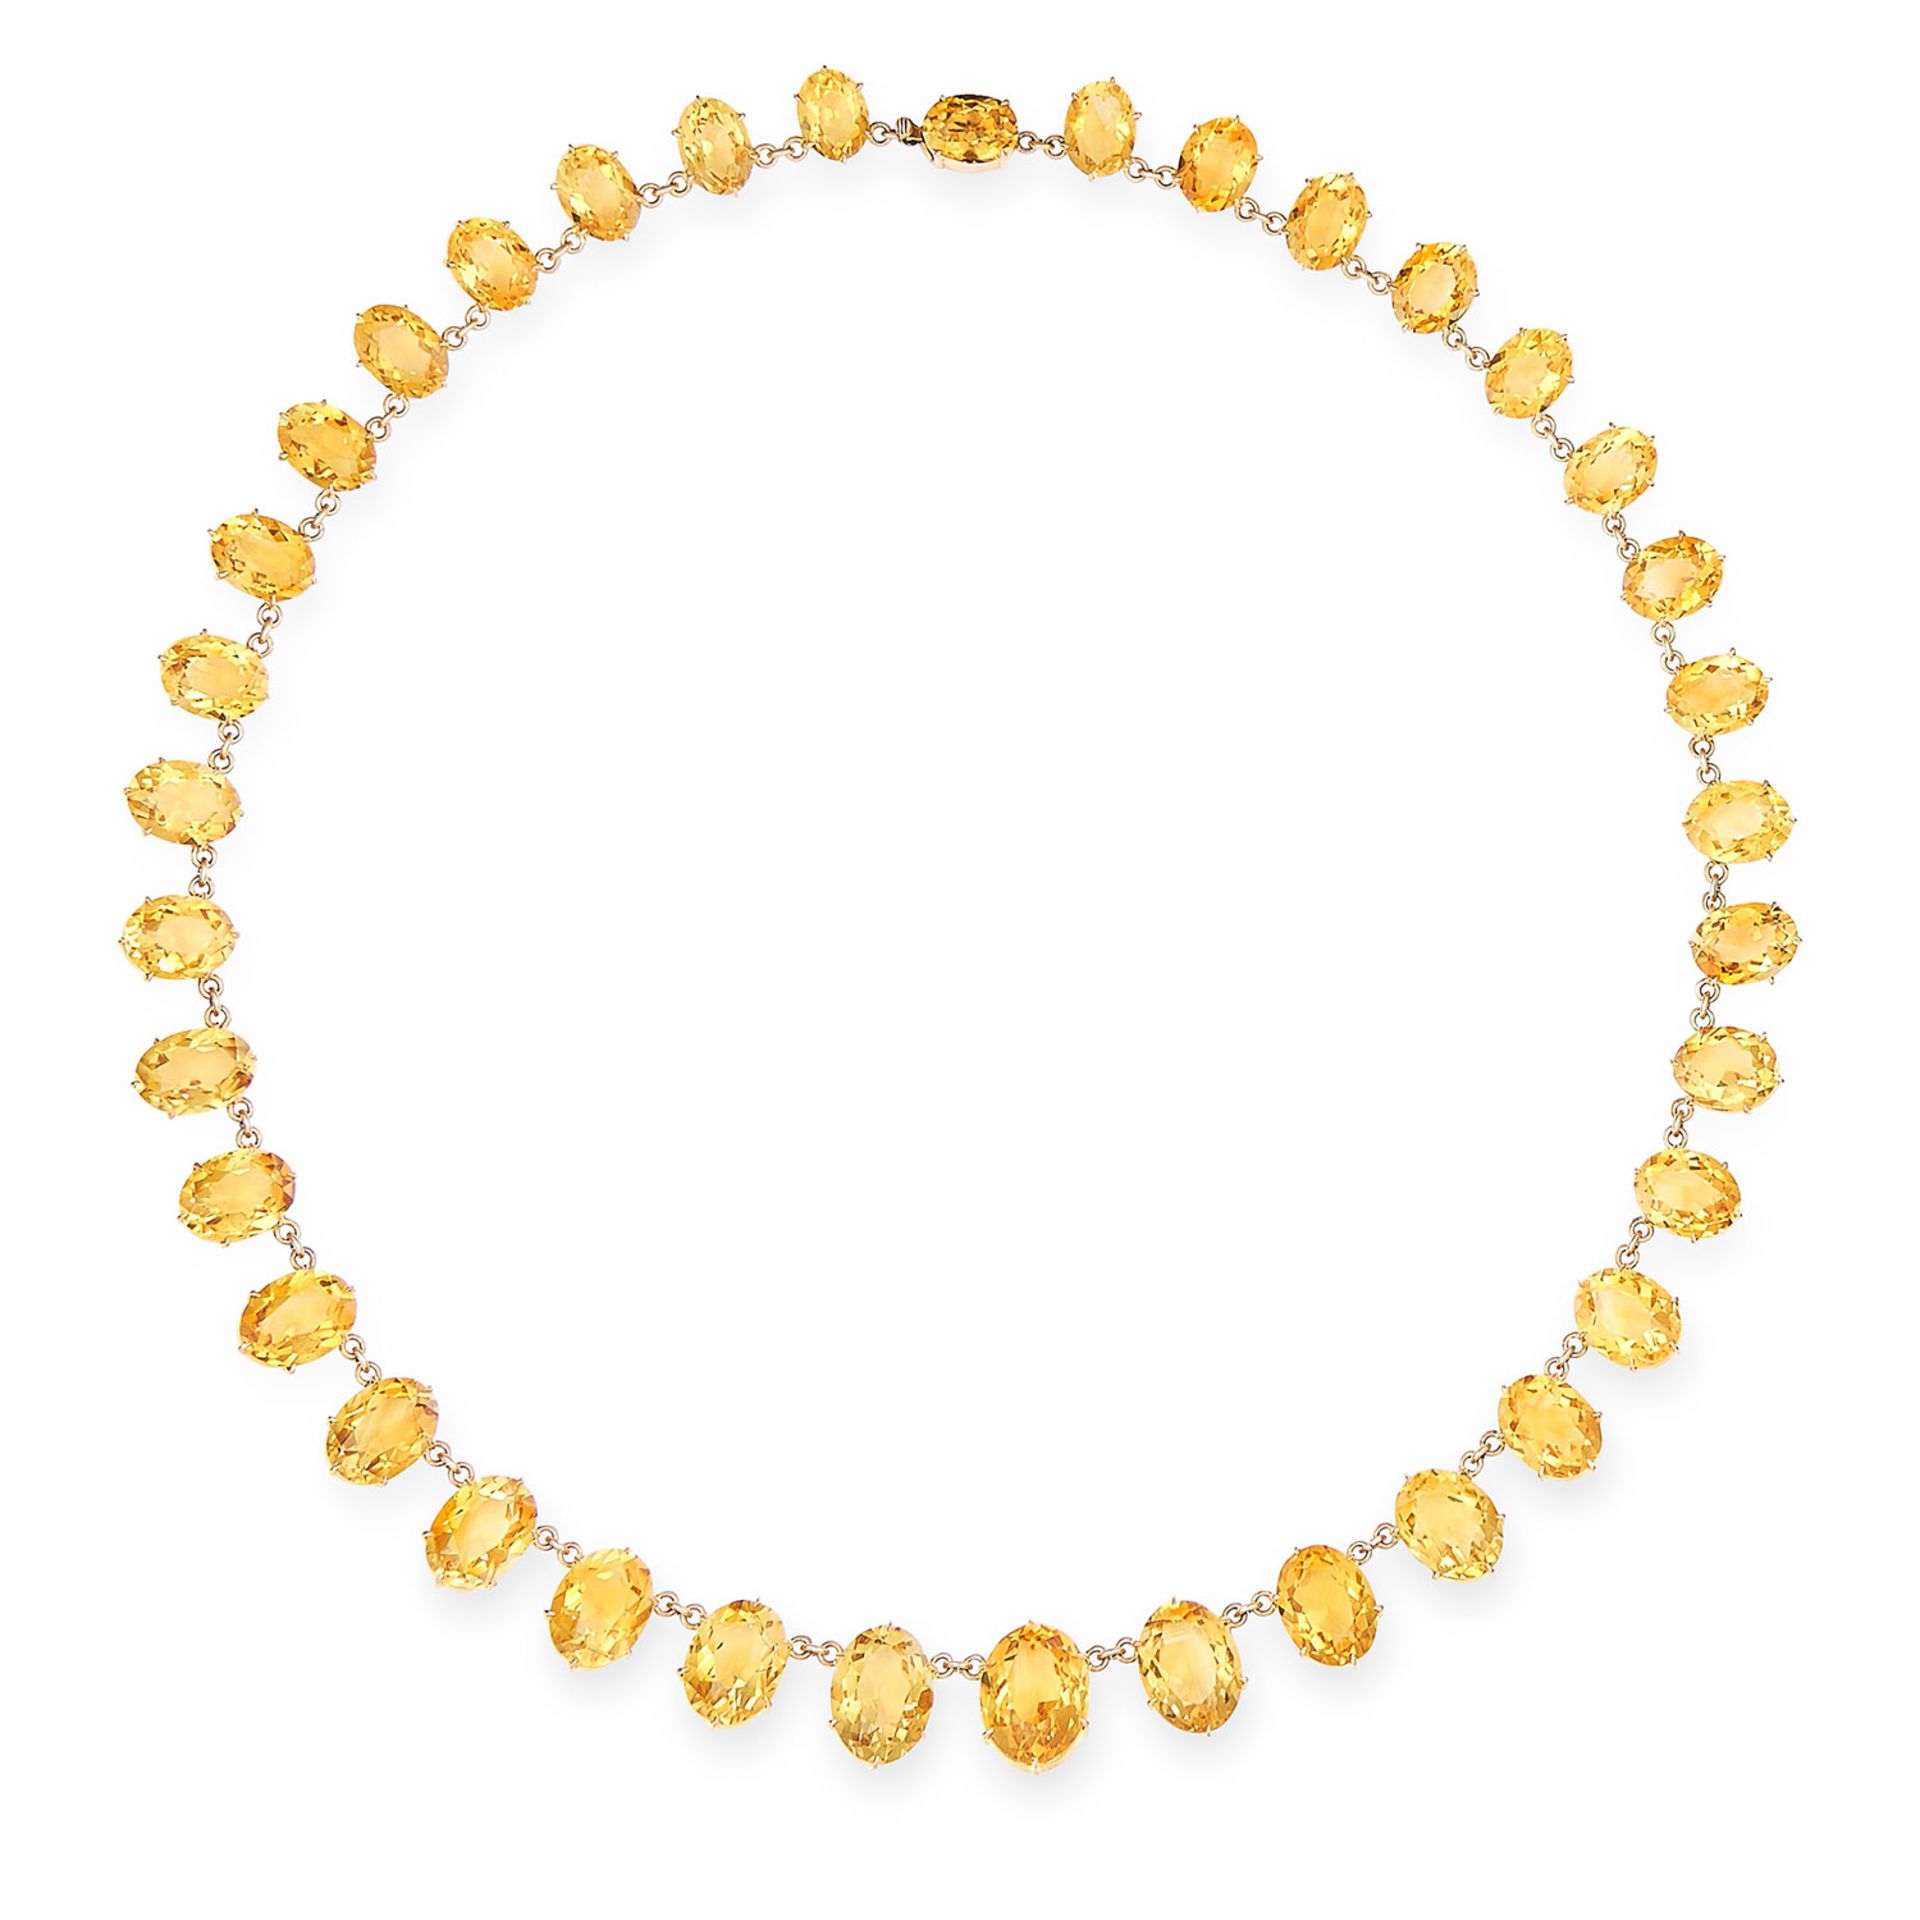 ANTIQUE CITRINE RIVIERA NECKLACE in yellow gold, formed of graduating oval cut citrine links,